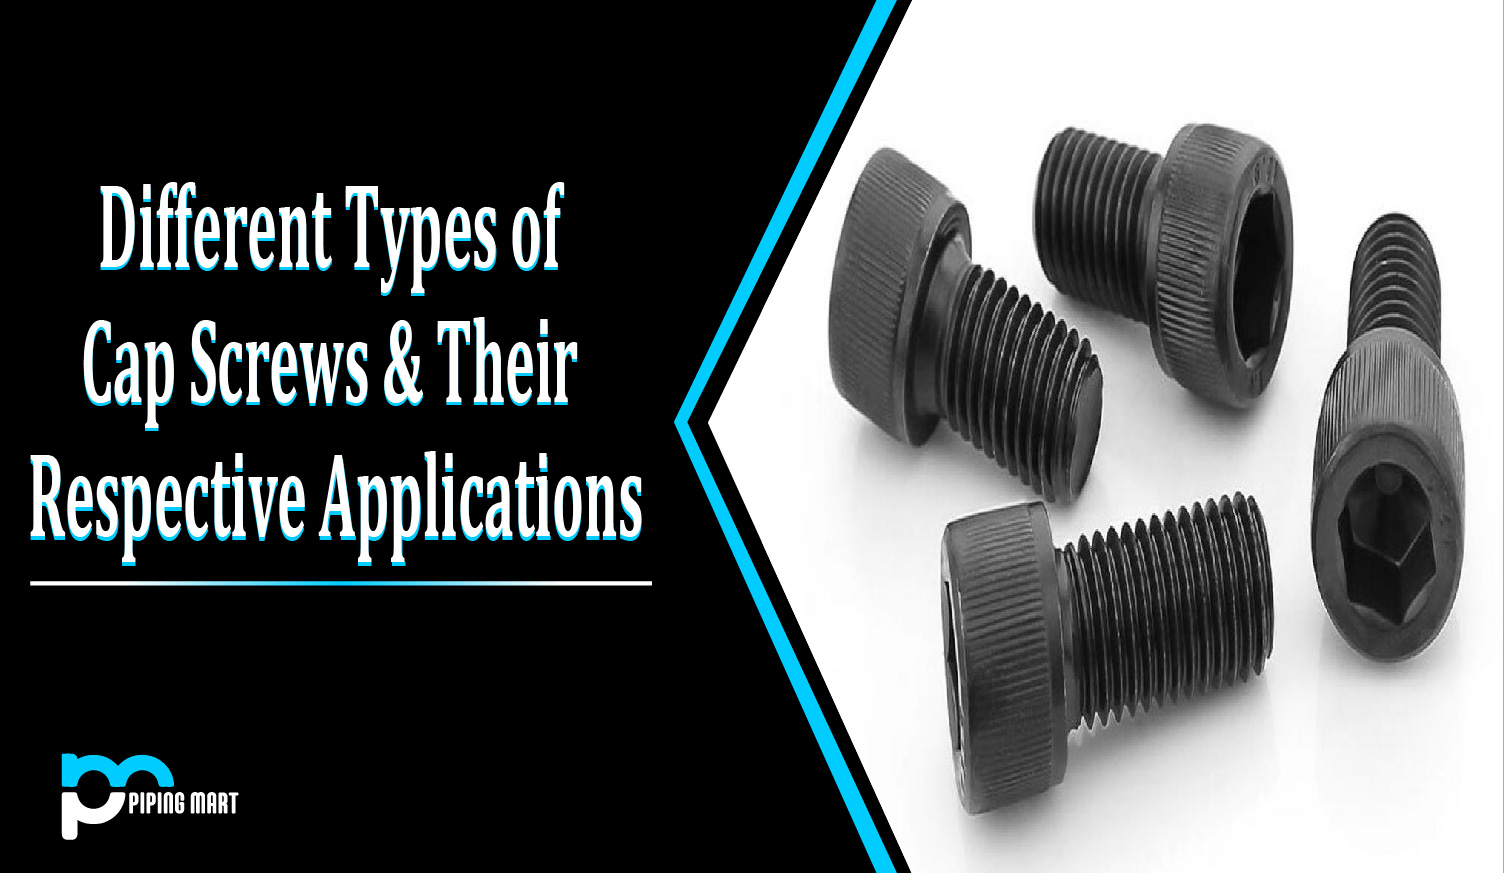 Different Types of Cap Screws and their Respective Applications